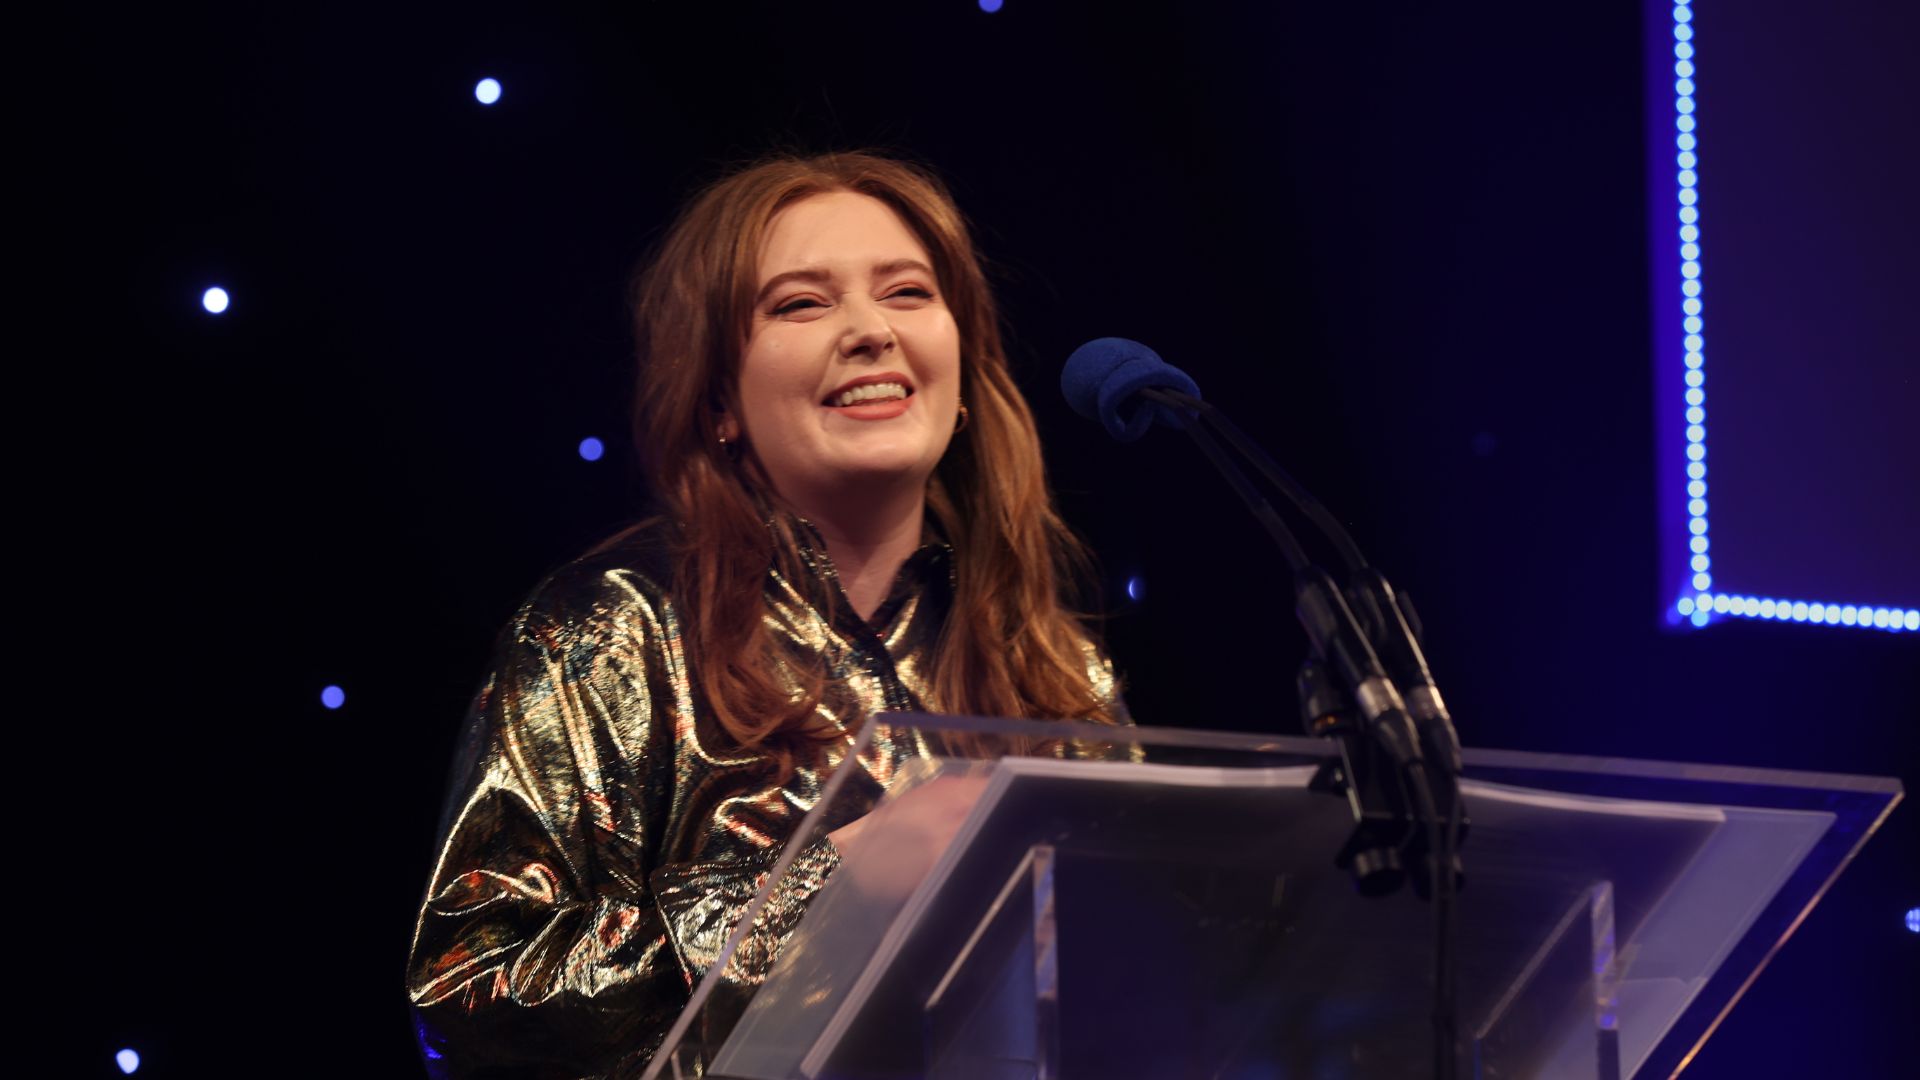 Alice Oseman wins Illustrator of the Year at The British Book Awards 2023 ceremony